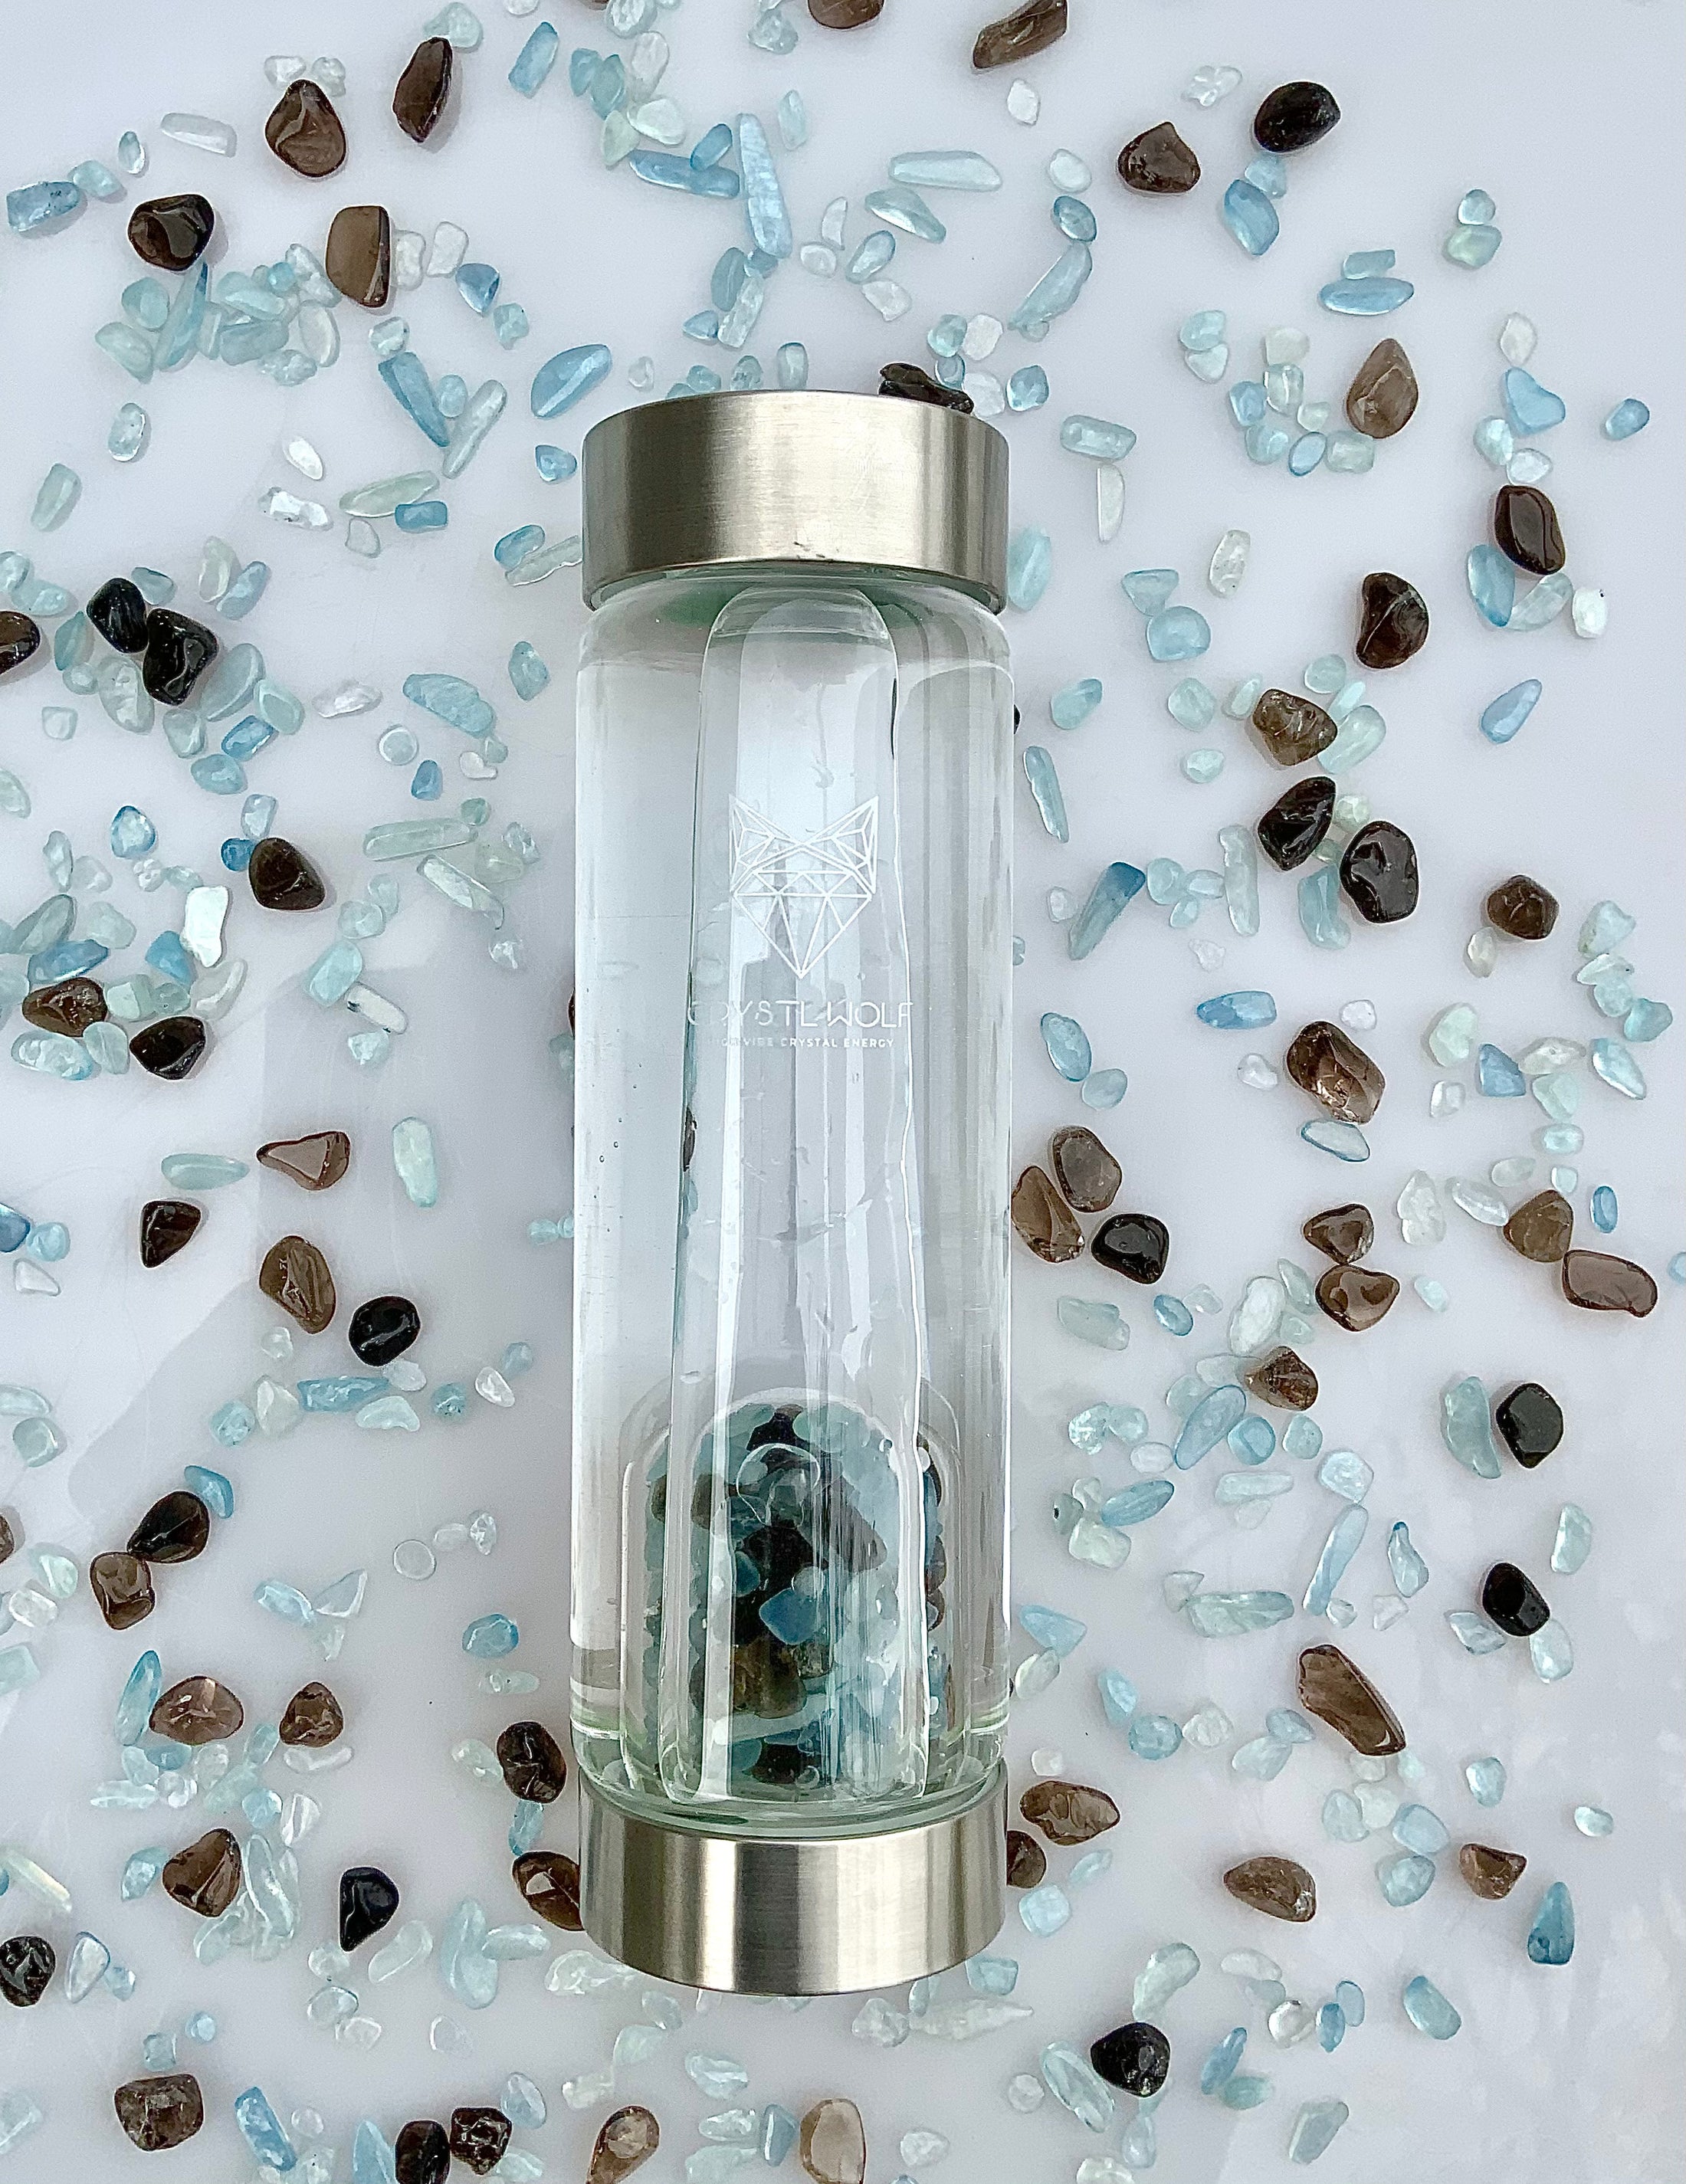 STRESS FREE - Crystal Infused Water Bottle